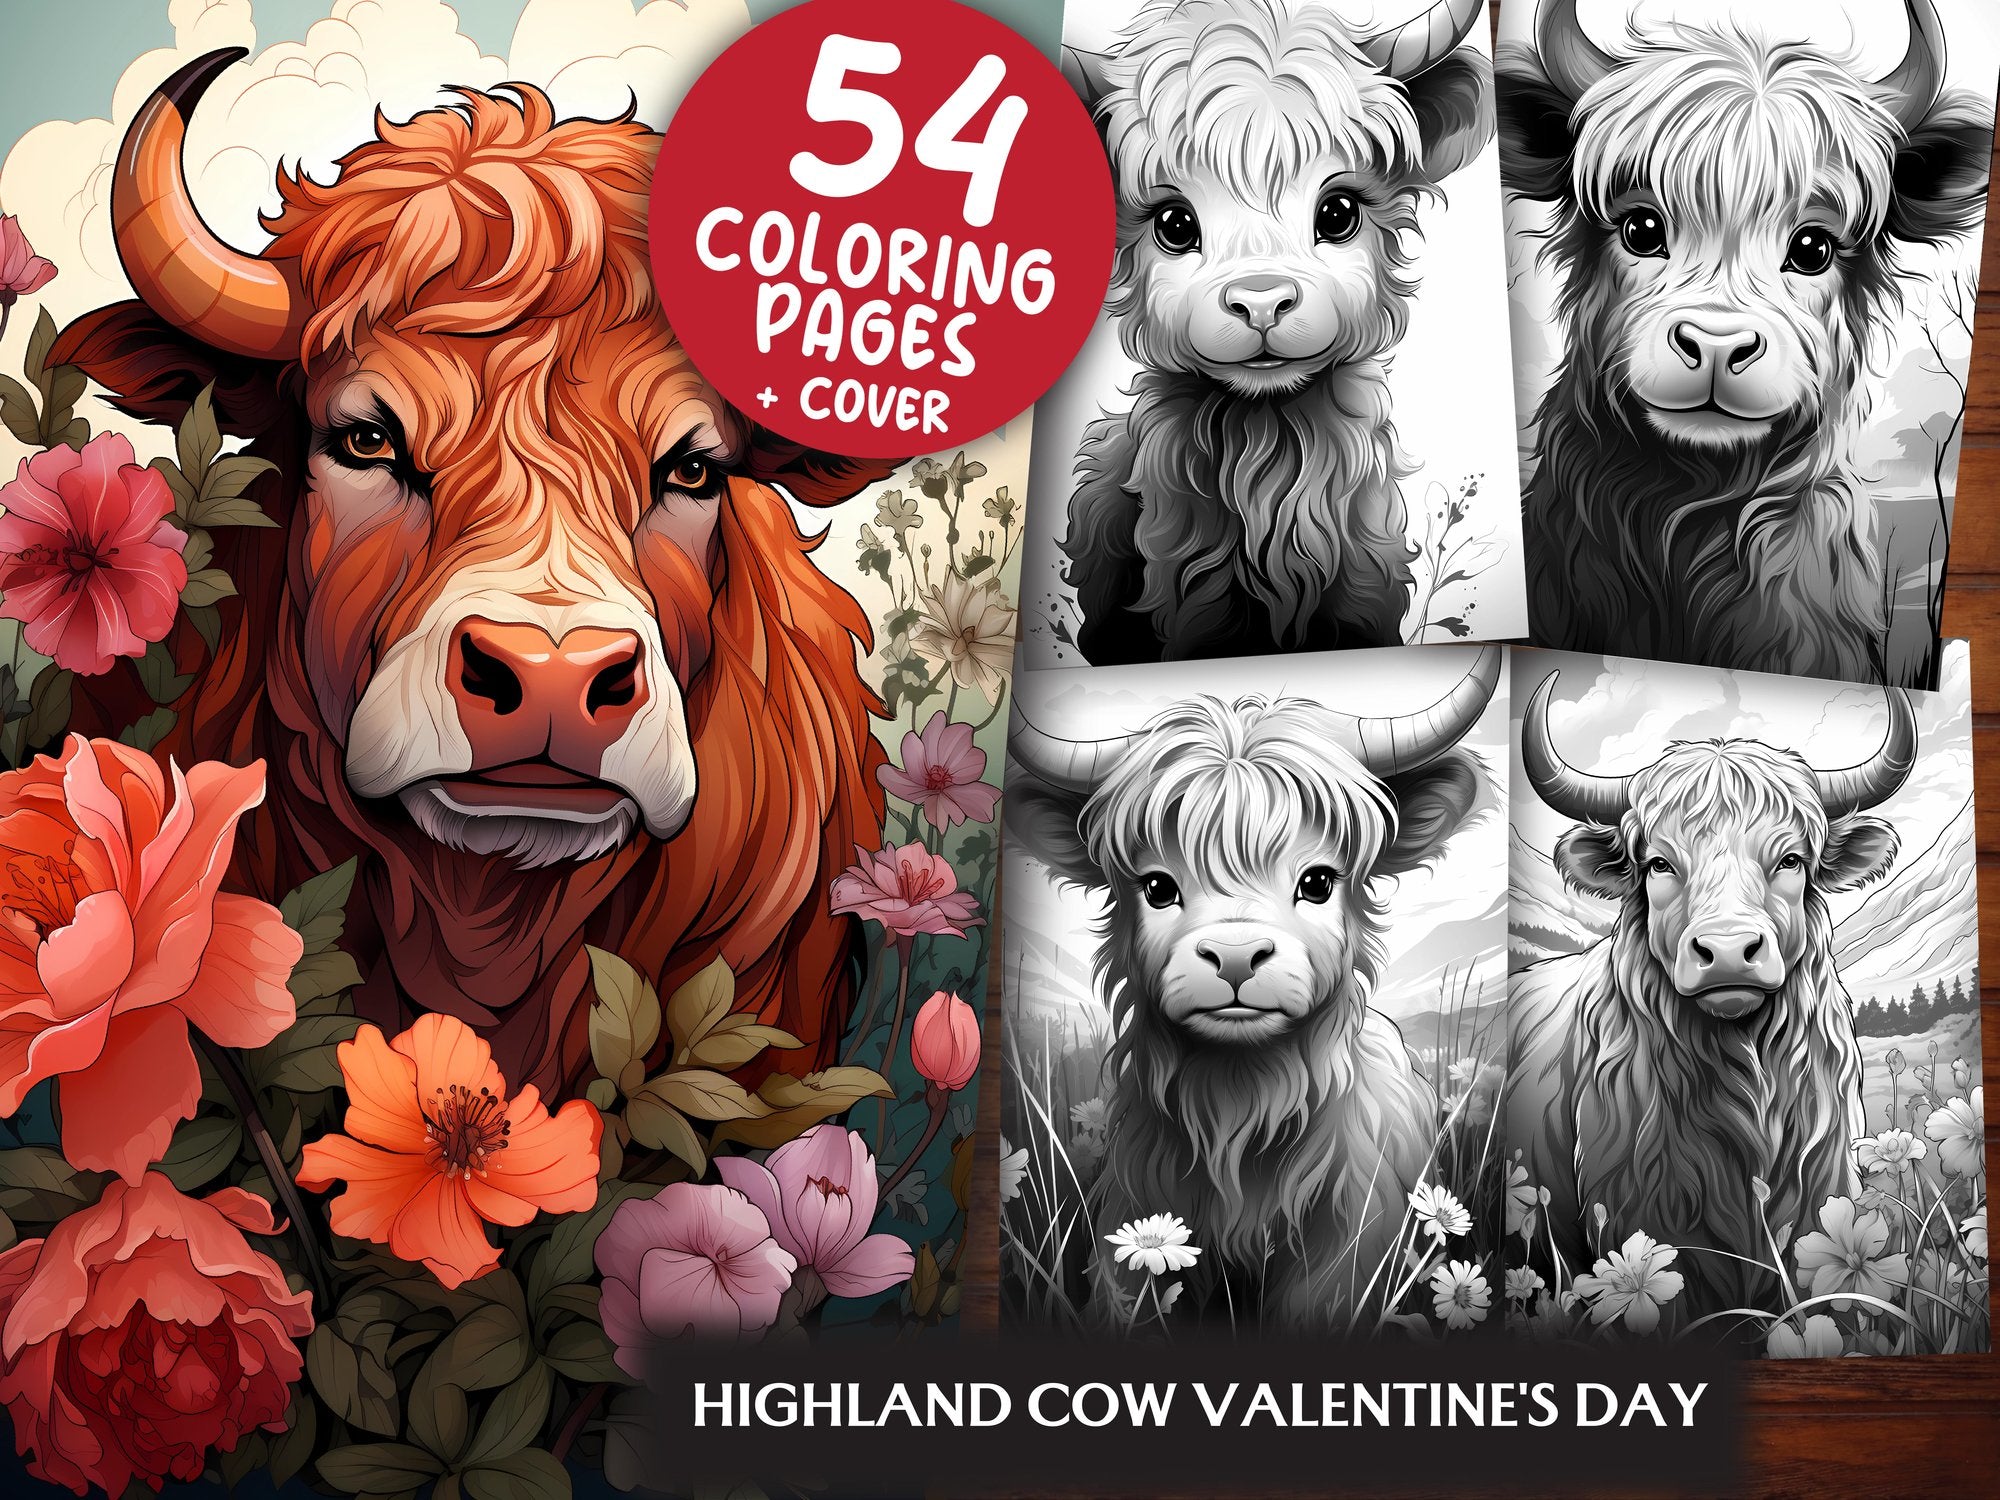 Highland Cow Valentines Day Coloring Books - CraftNest